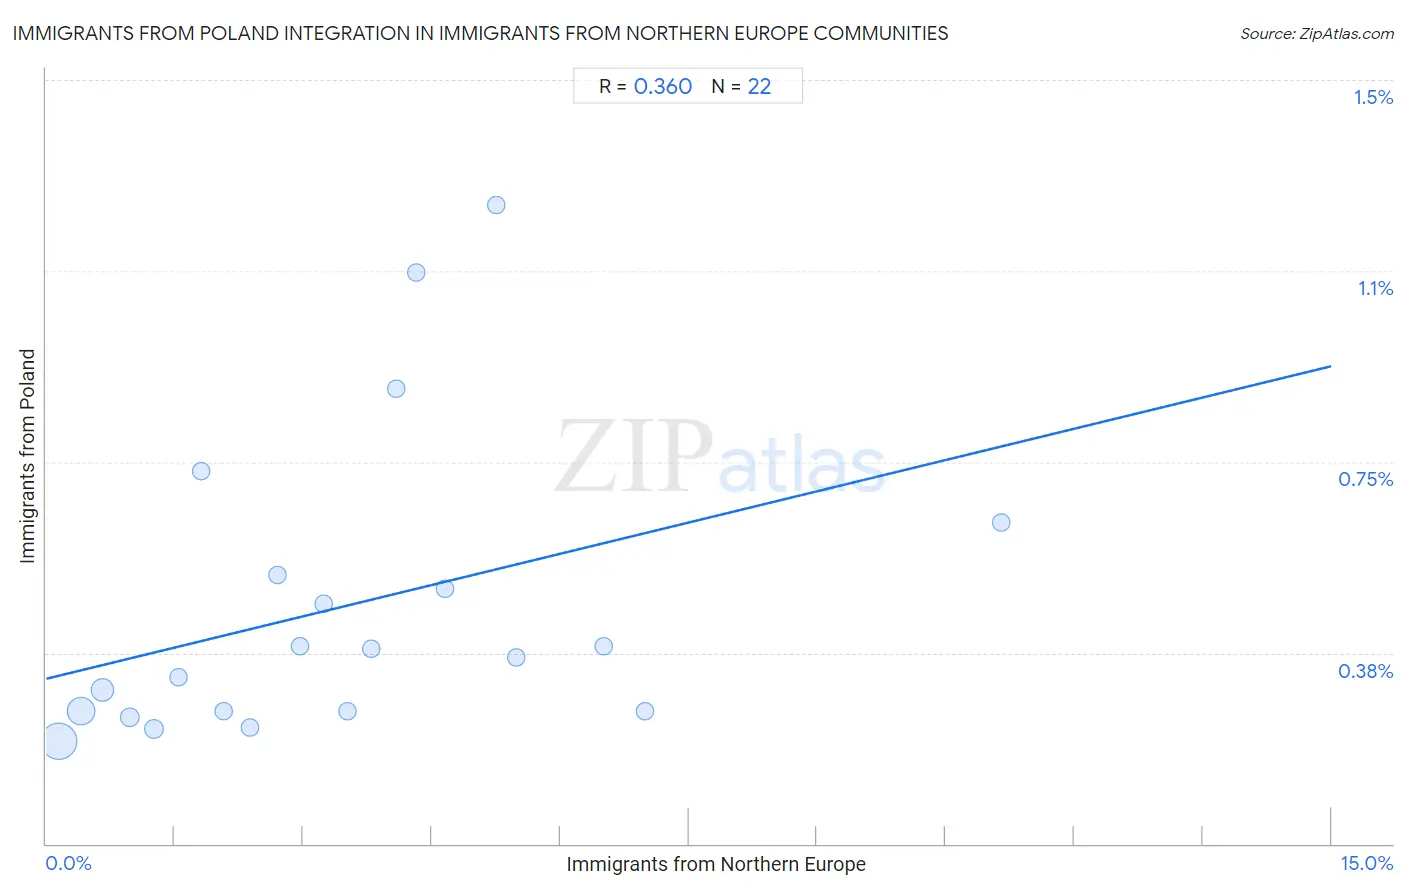 Immigrants from Northern Europe Integration in Immigrants from Poland Communities